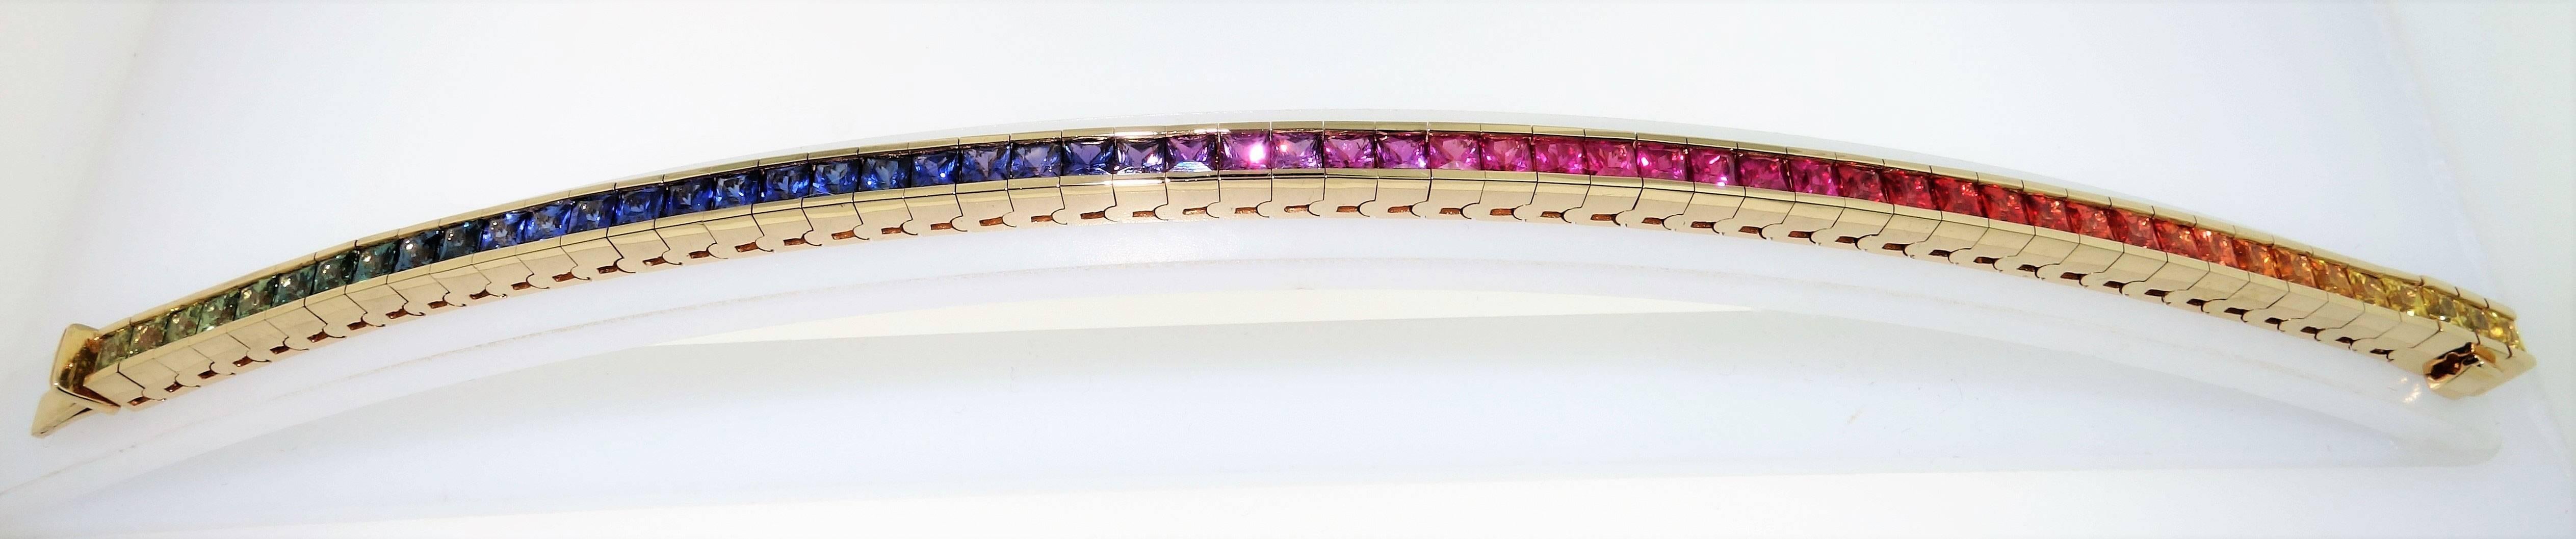 Simply fabulous Princess cut Multi-color Sapphire line tennis bracelet; 12.71 Carat Colors of the Rainbow of 3.3mm stones, set in 18k yellow gold. Approx. Bracelet measures approx. 7 inches long x .25 inches wide. Classic and so easy to